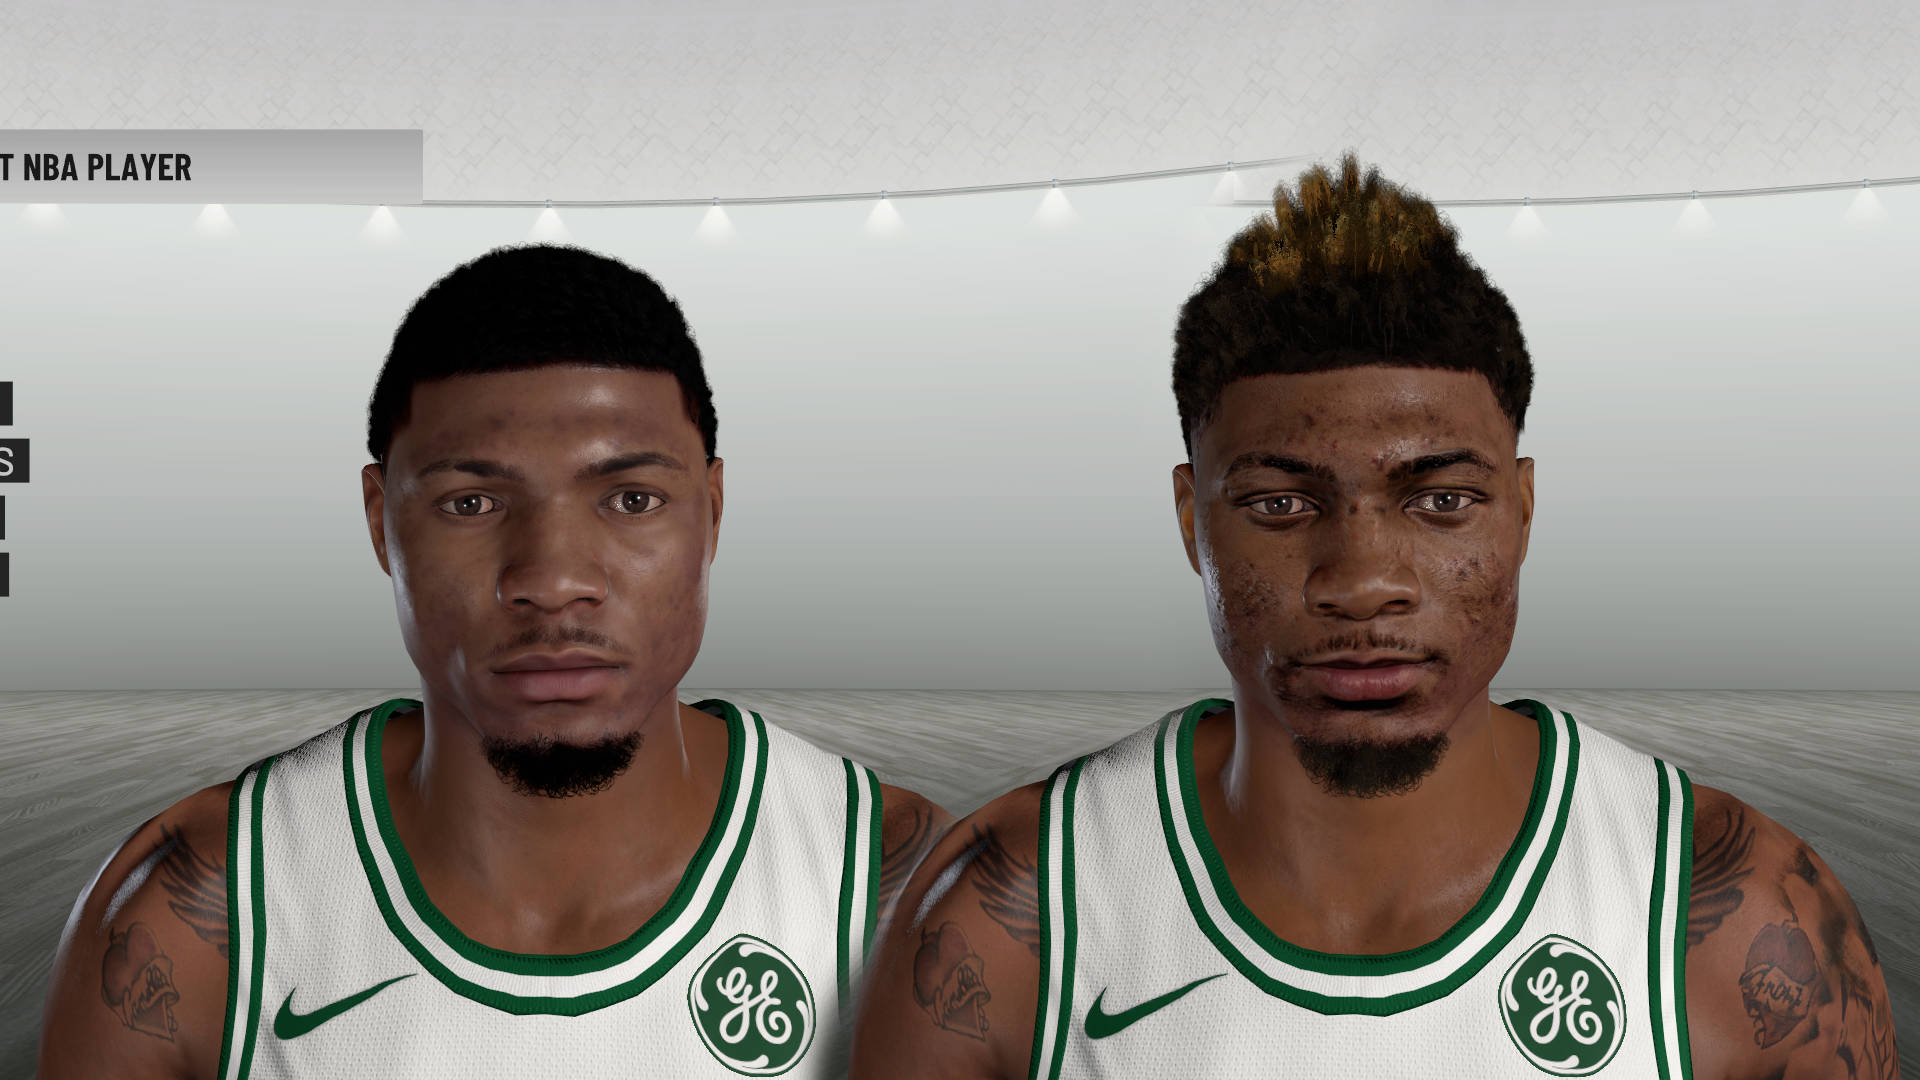 Marcus Smart On NBA Video Game Wallpaper